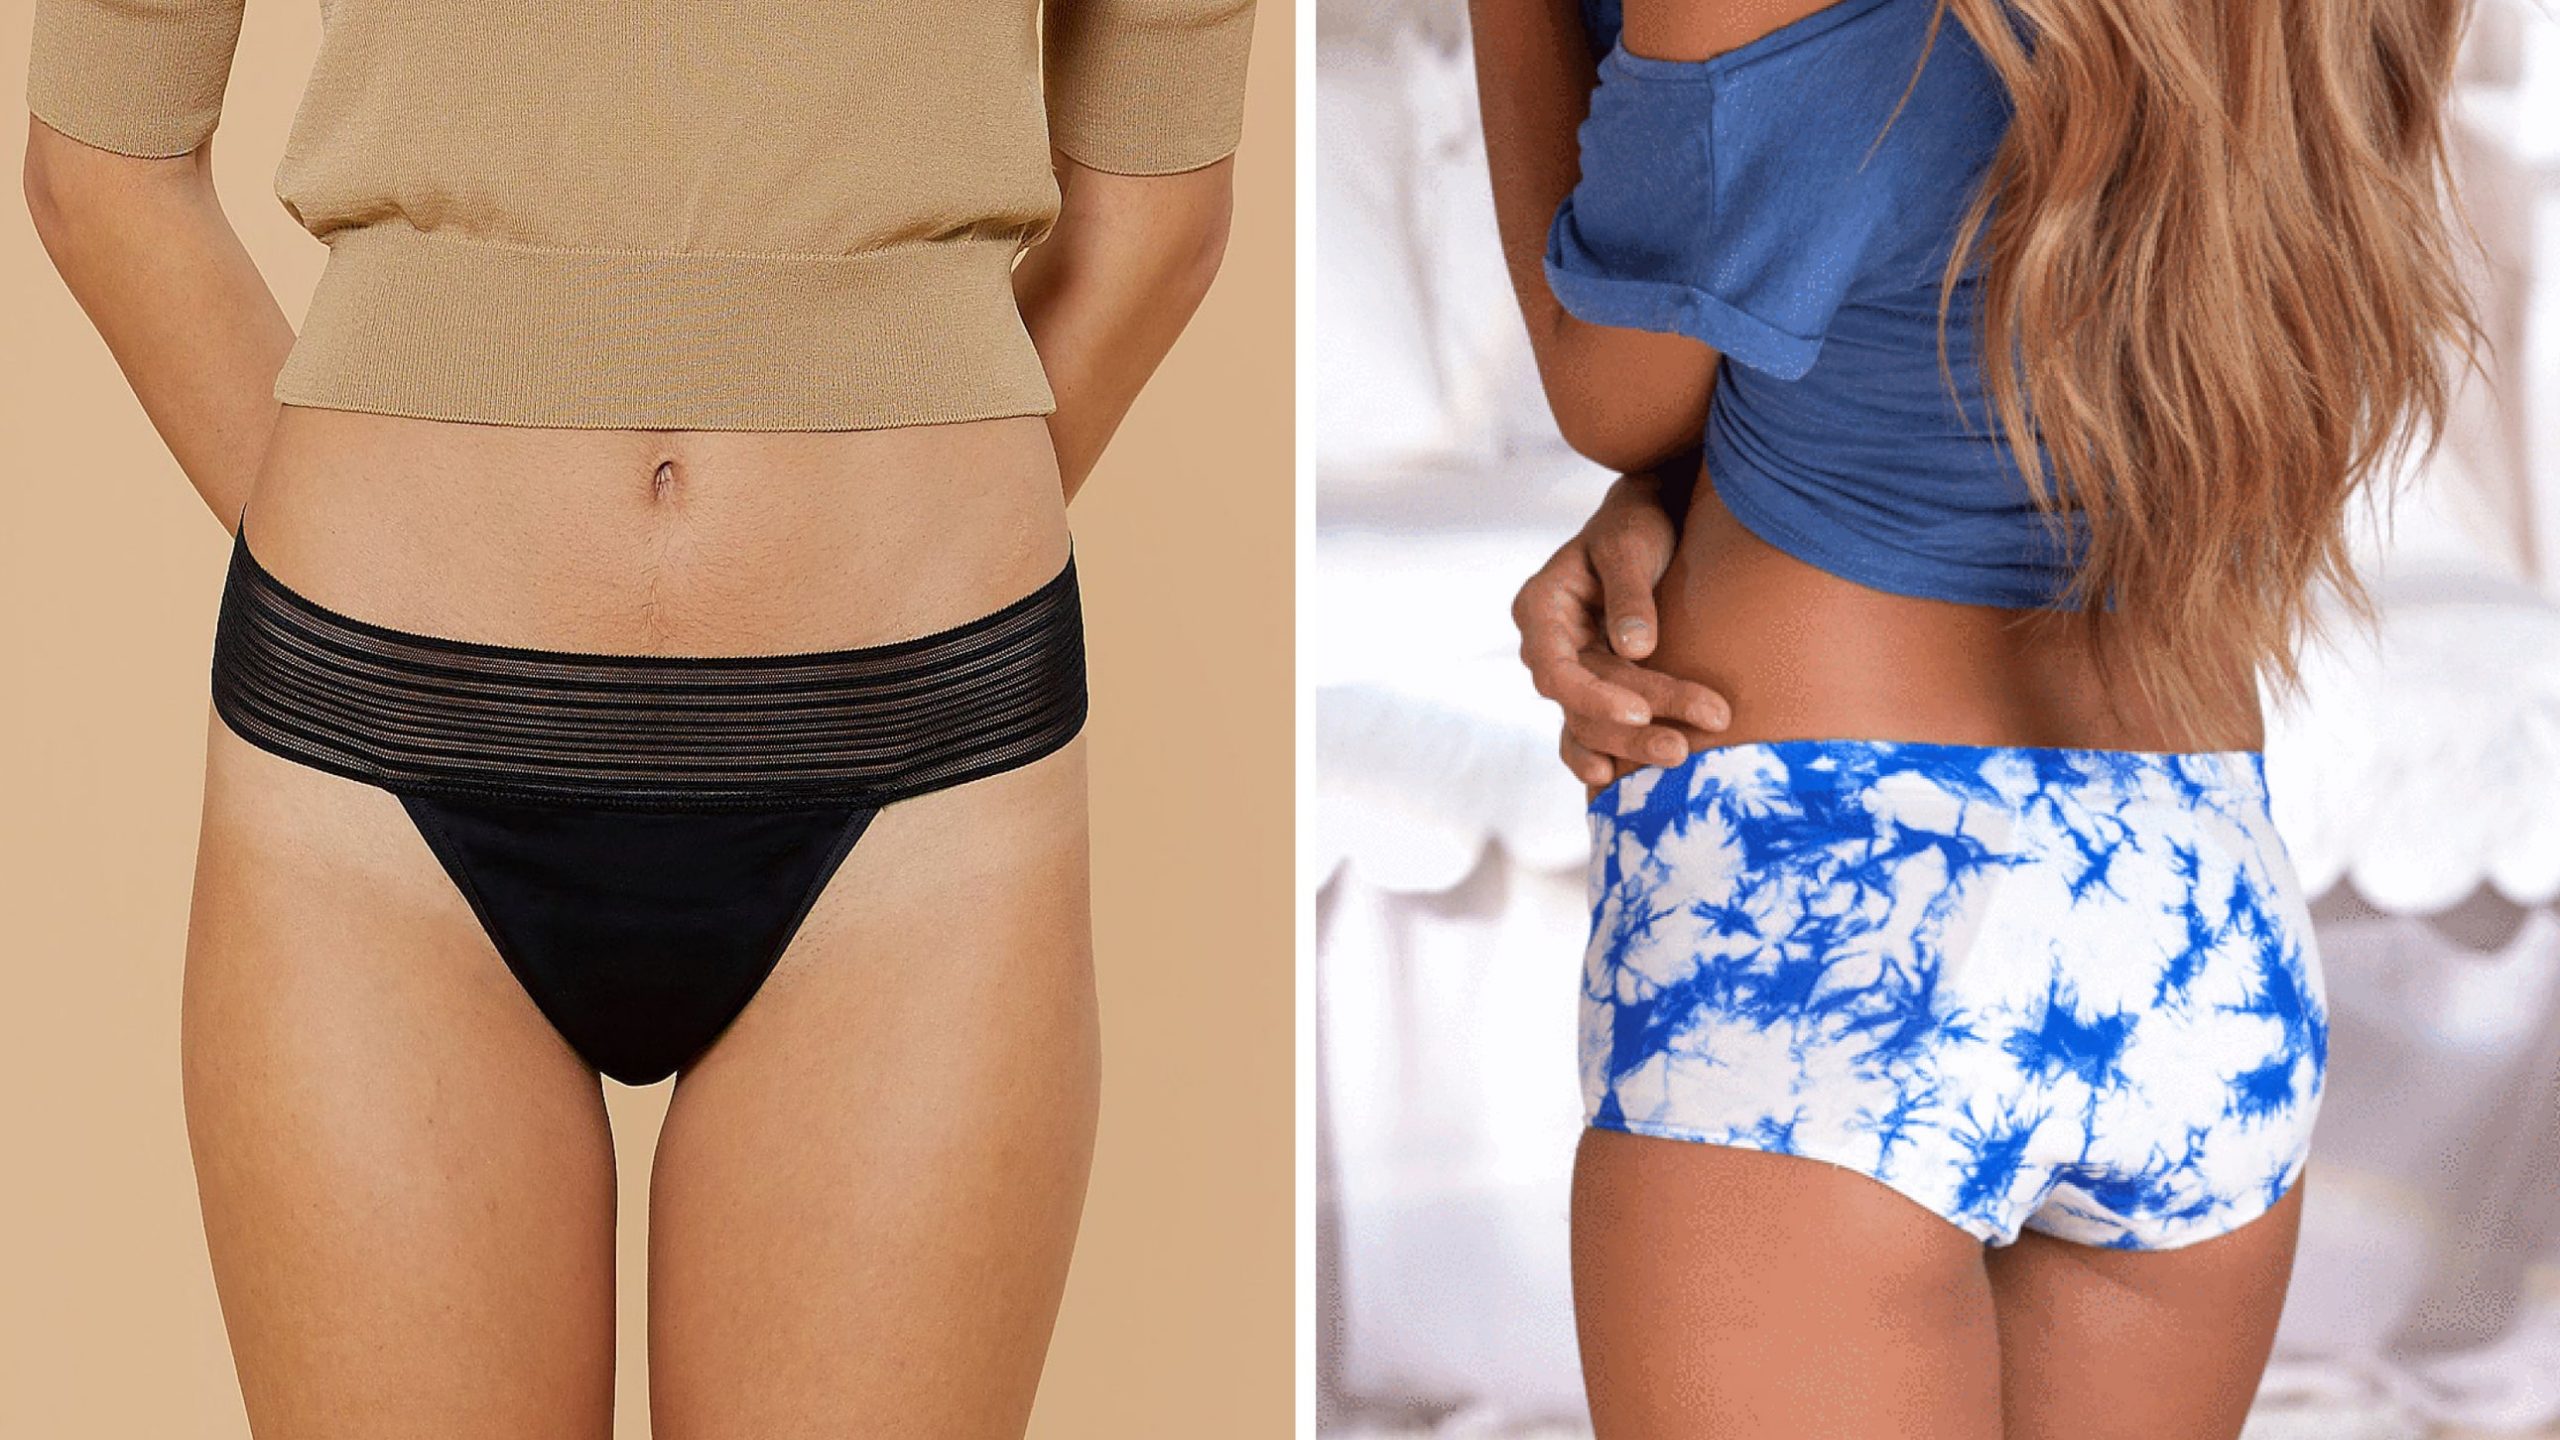 8 Best Period Panties That Actually Work for Heavy and Light Flows